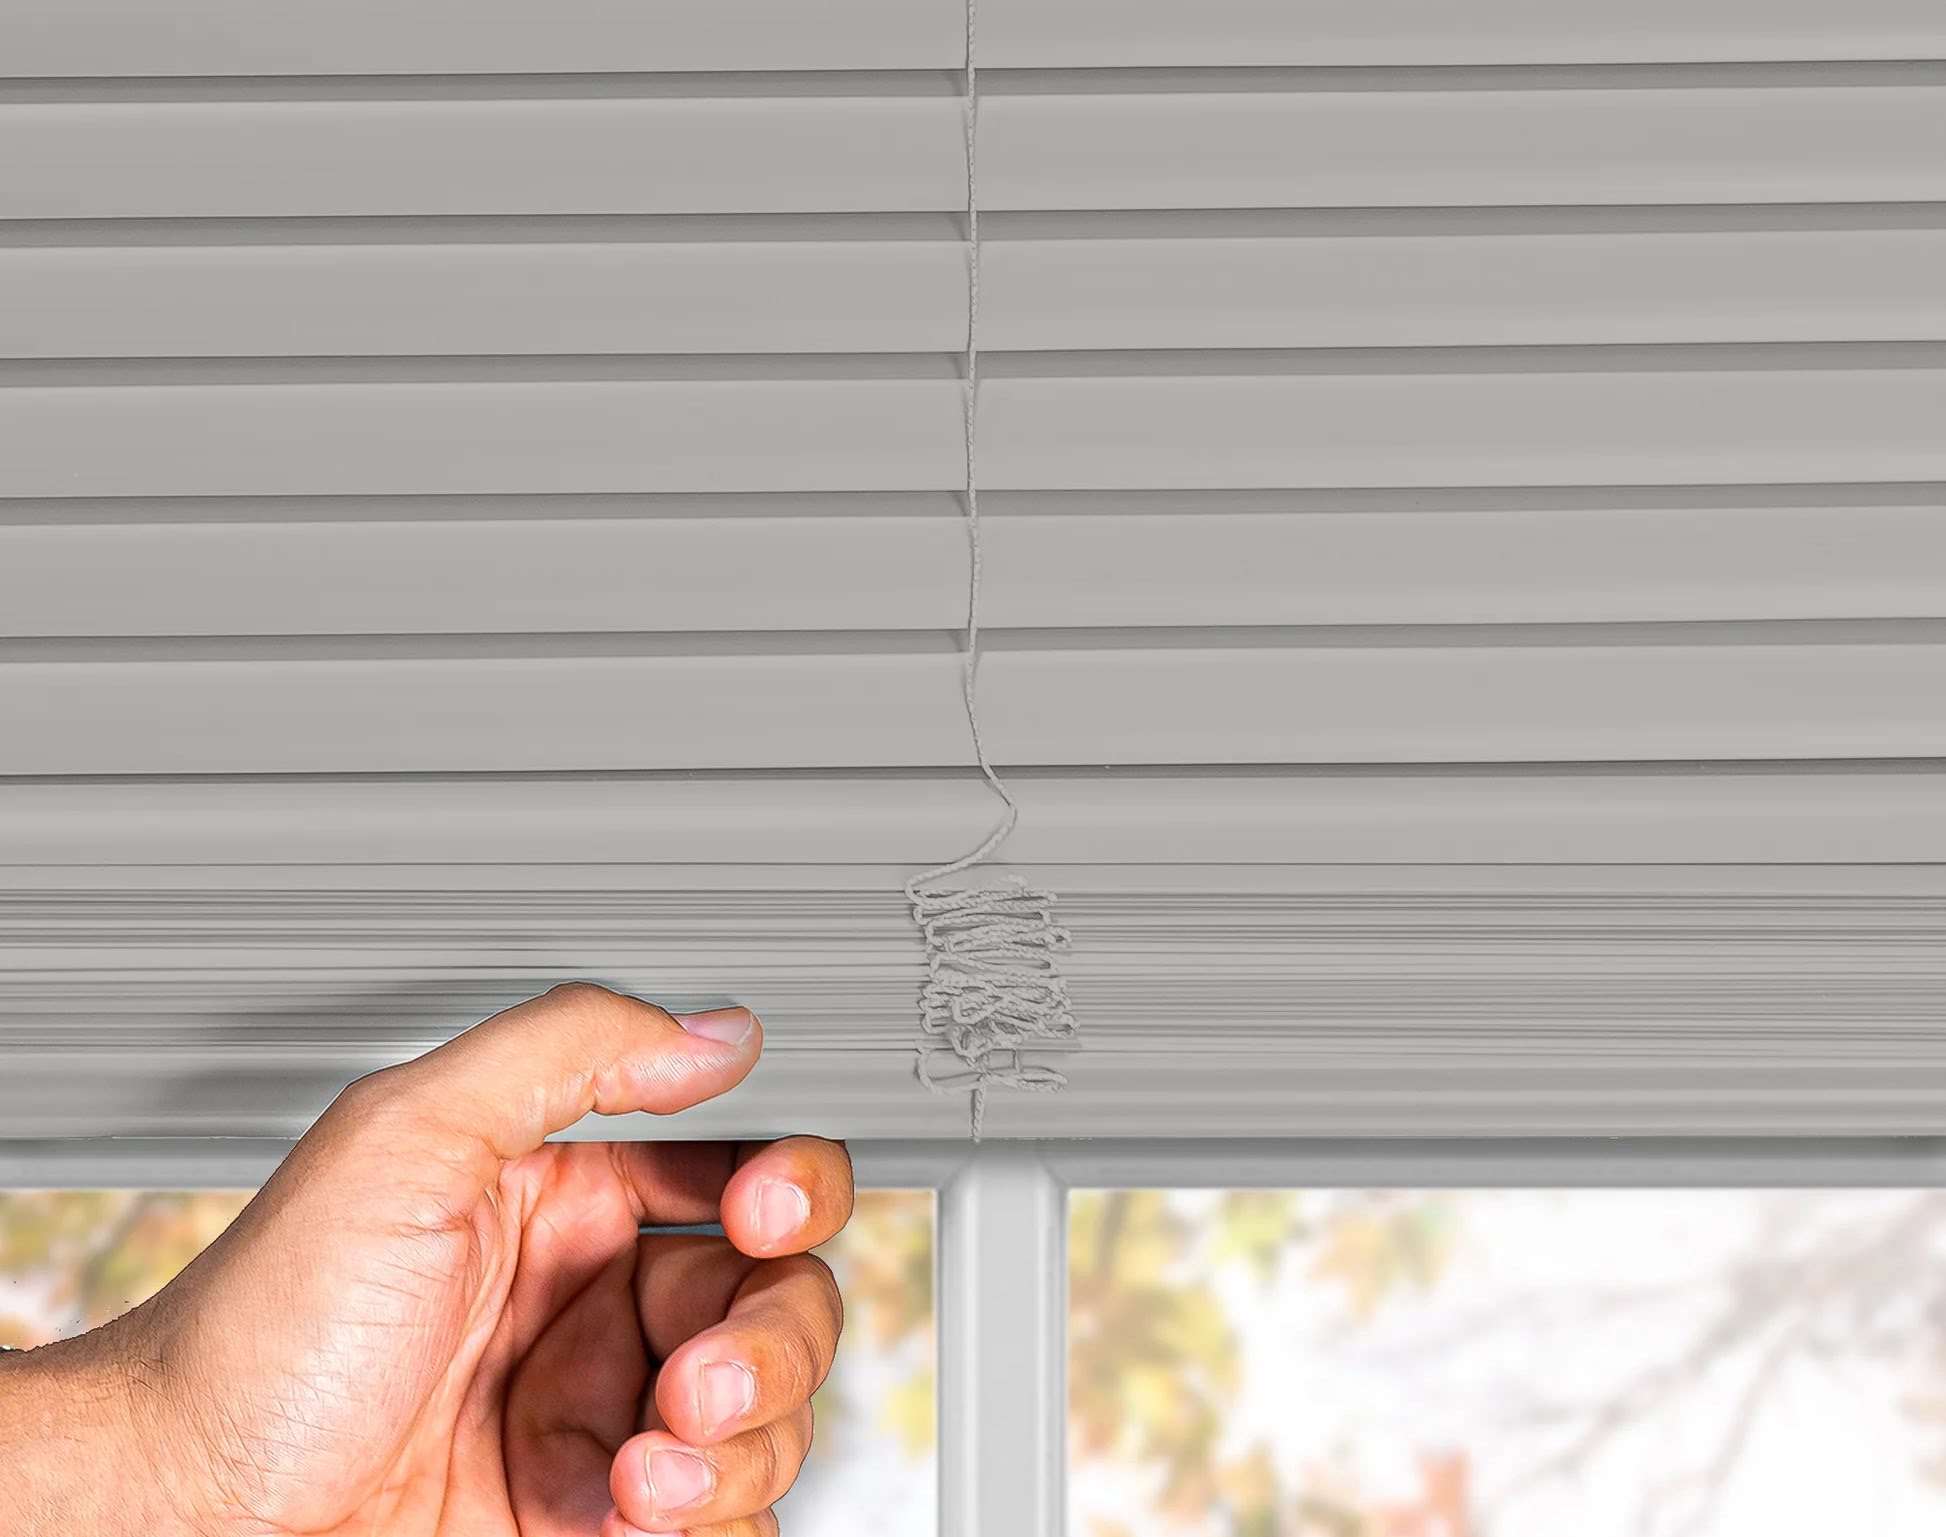 How To Pull Down Cordless Blinds